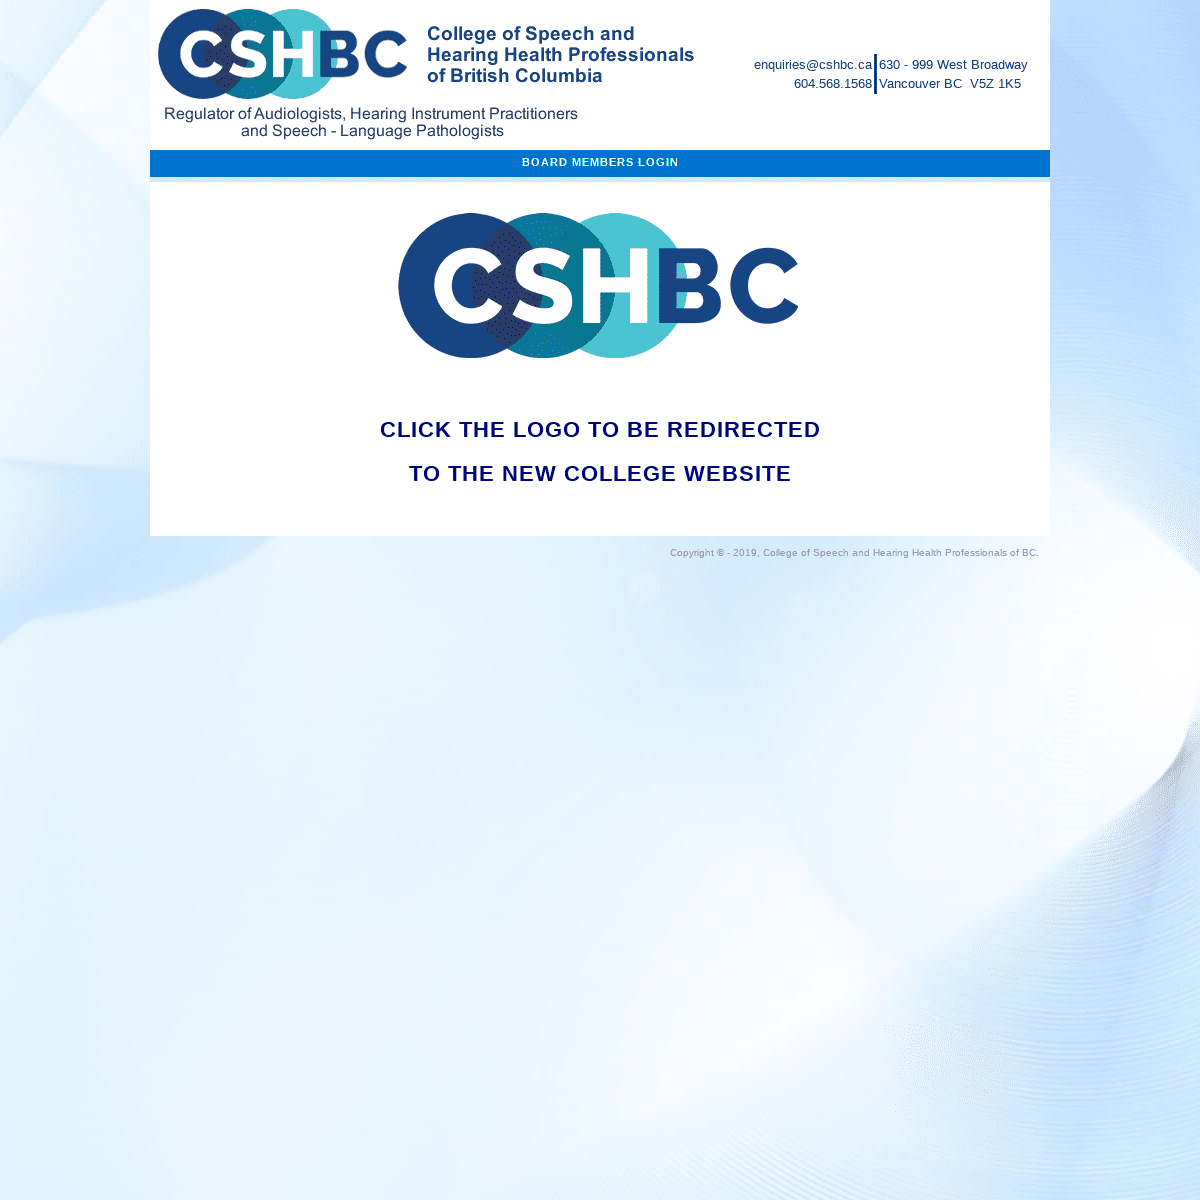 A complete backup of cshhpbc.org